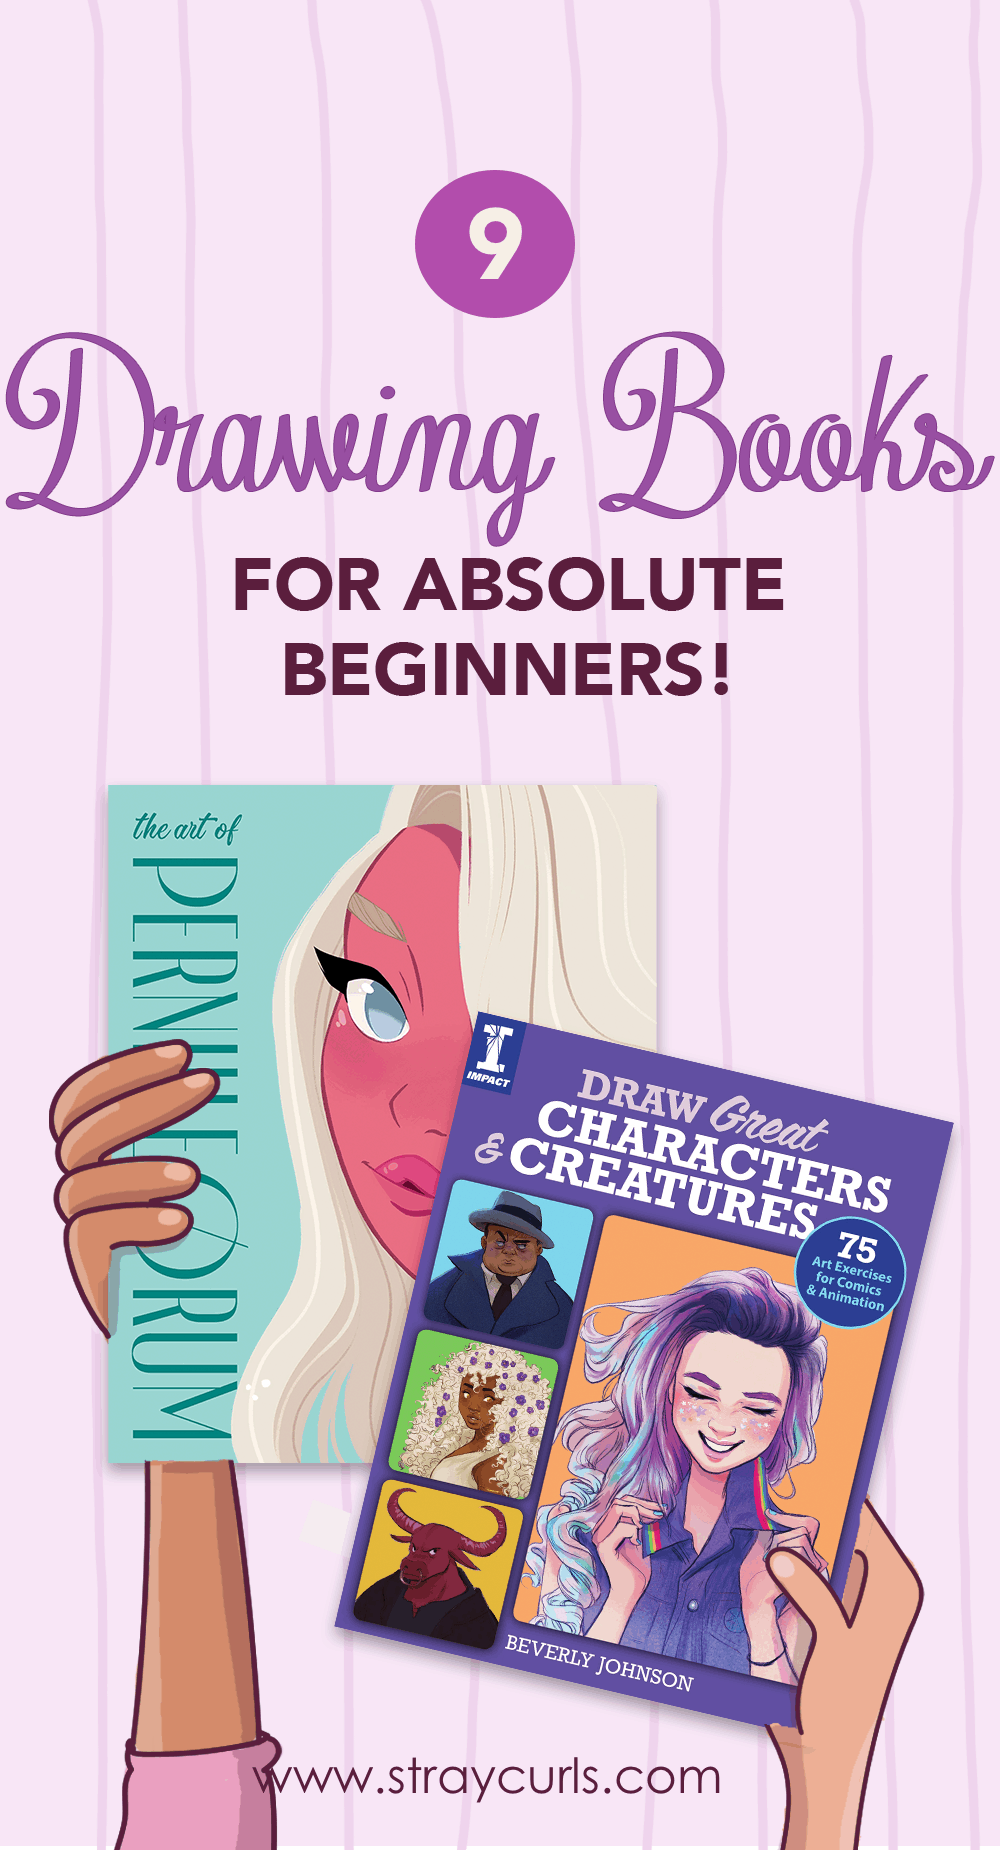 Here are the best drawing books for beginners. These books are the best resources for people who want to learn how to draw.